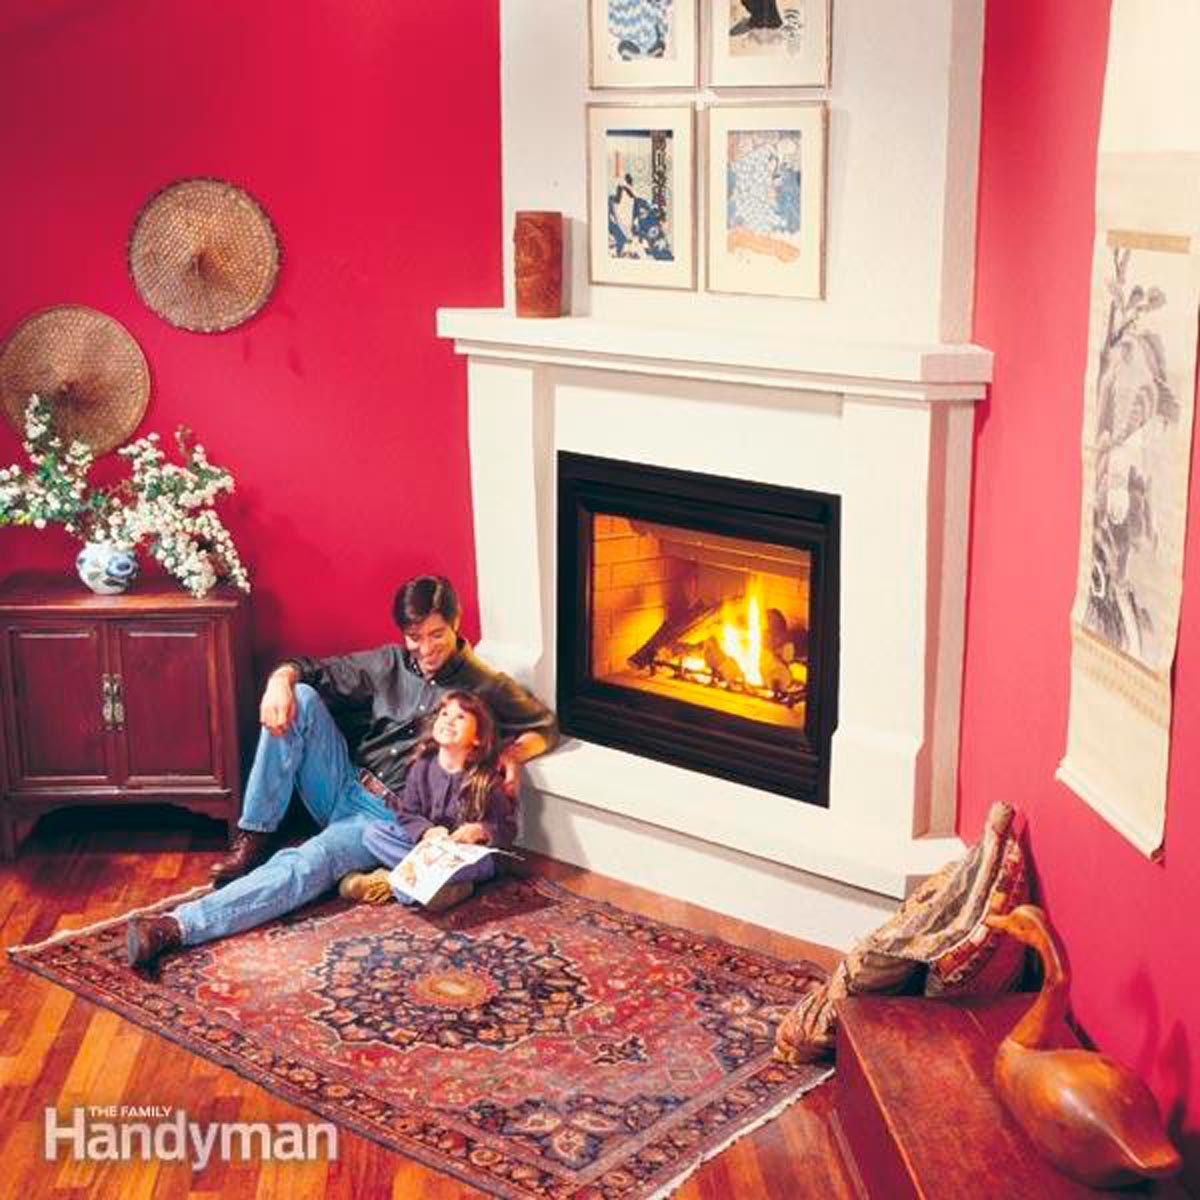 How much does it cost to replace a gas fireplace How To Install A Gas Fireplace Diy Built In Gas Fireplace